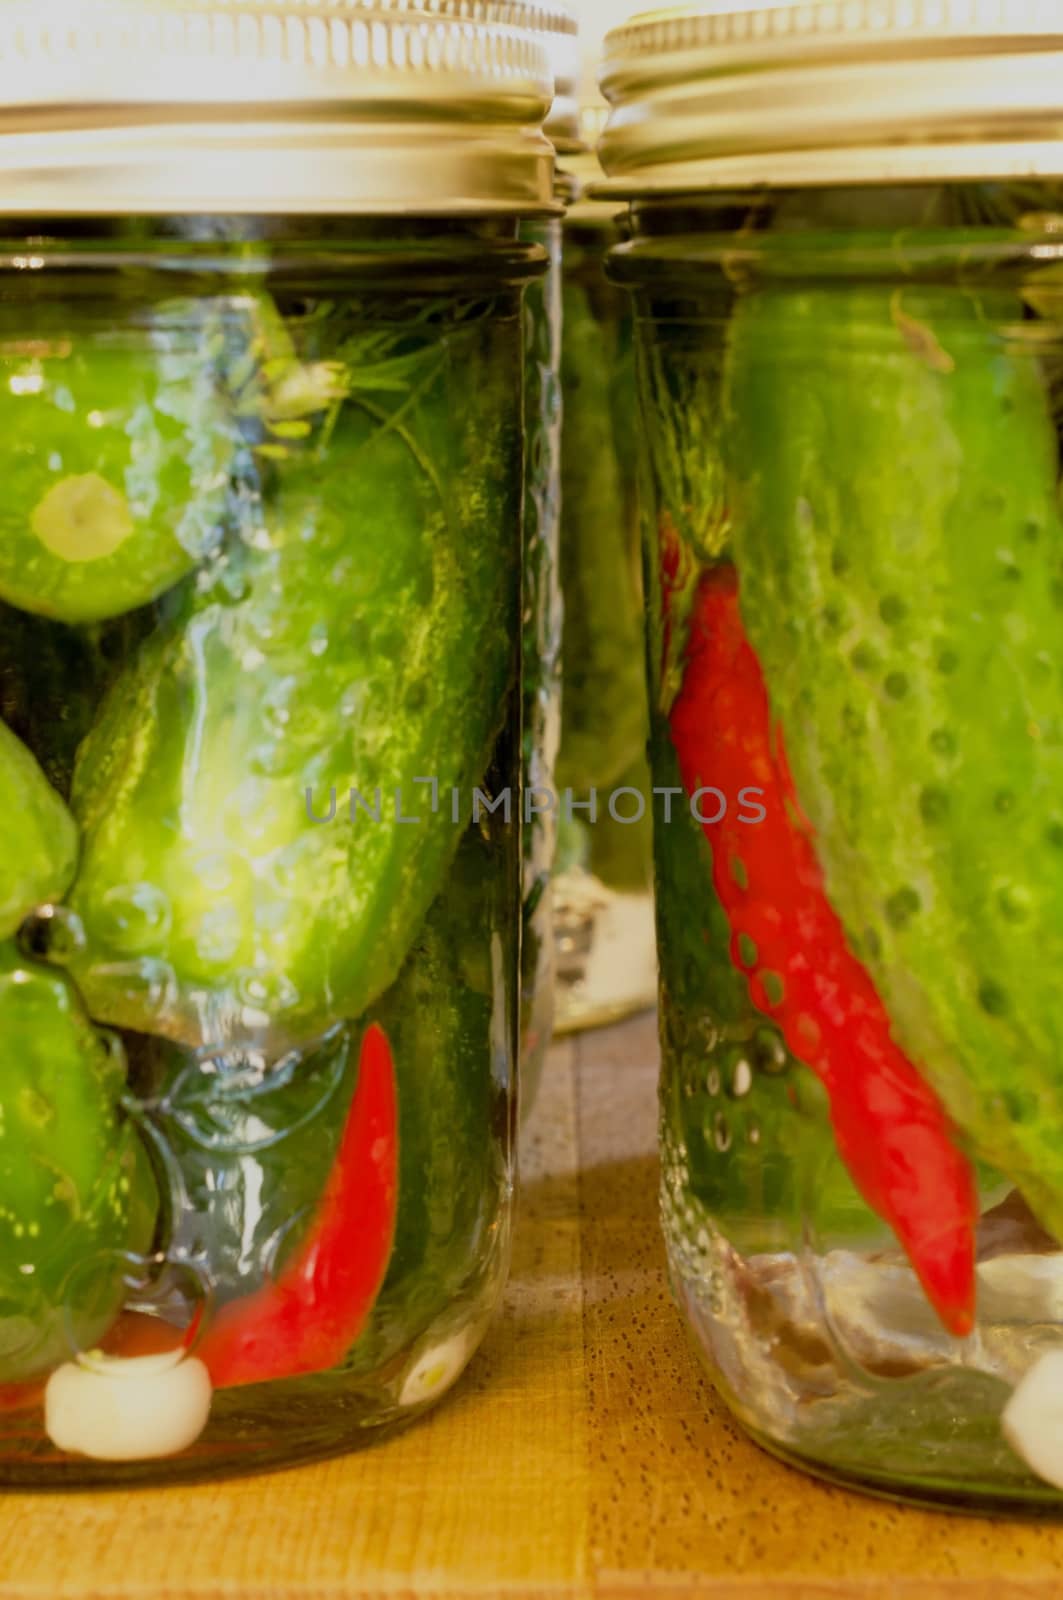 Dill Pickles with a Kick by edcorey